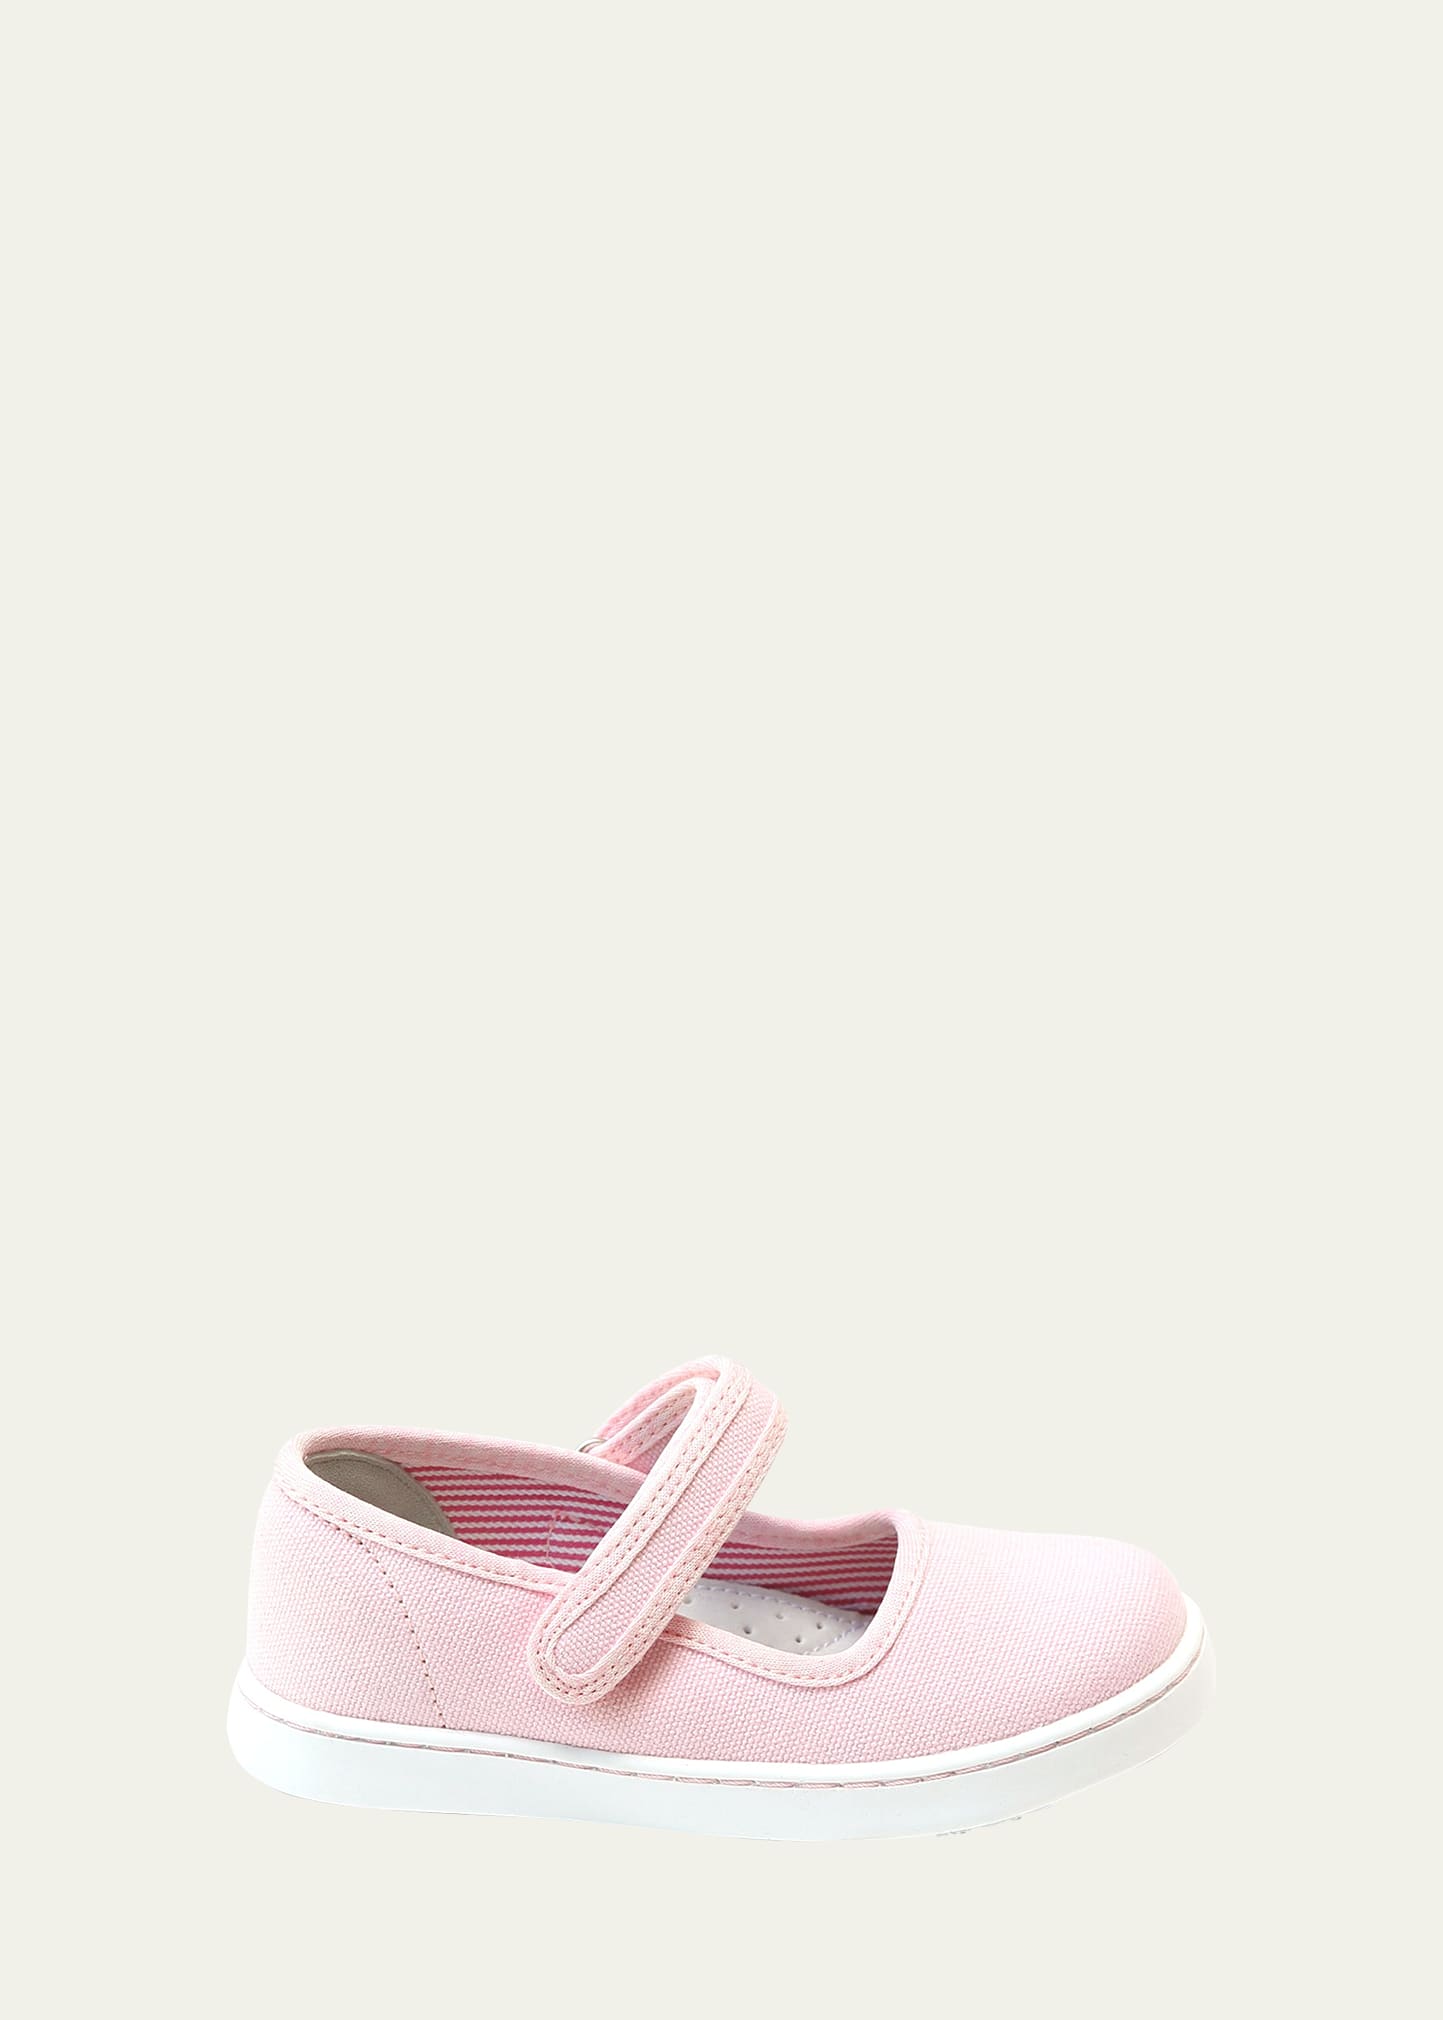 L'amour Shoes Girl's Jenna Canvas Mary Jane Shoes, Baby/kids/toddlers In Light/pastel Pink